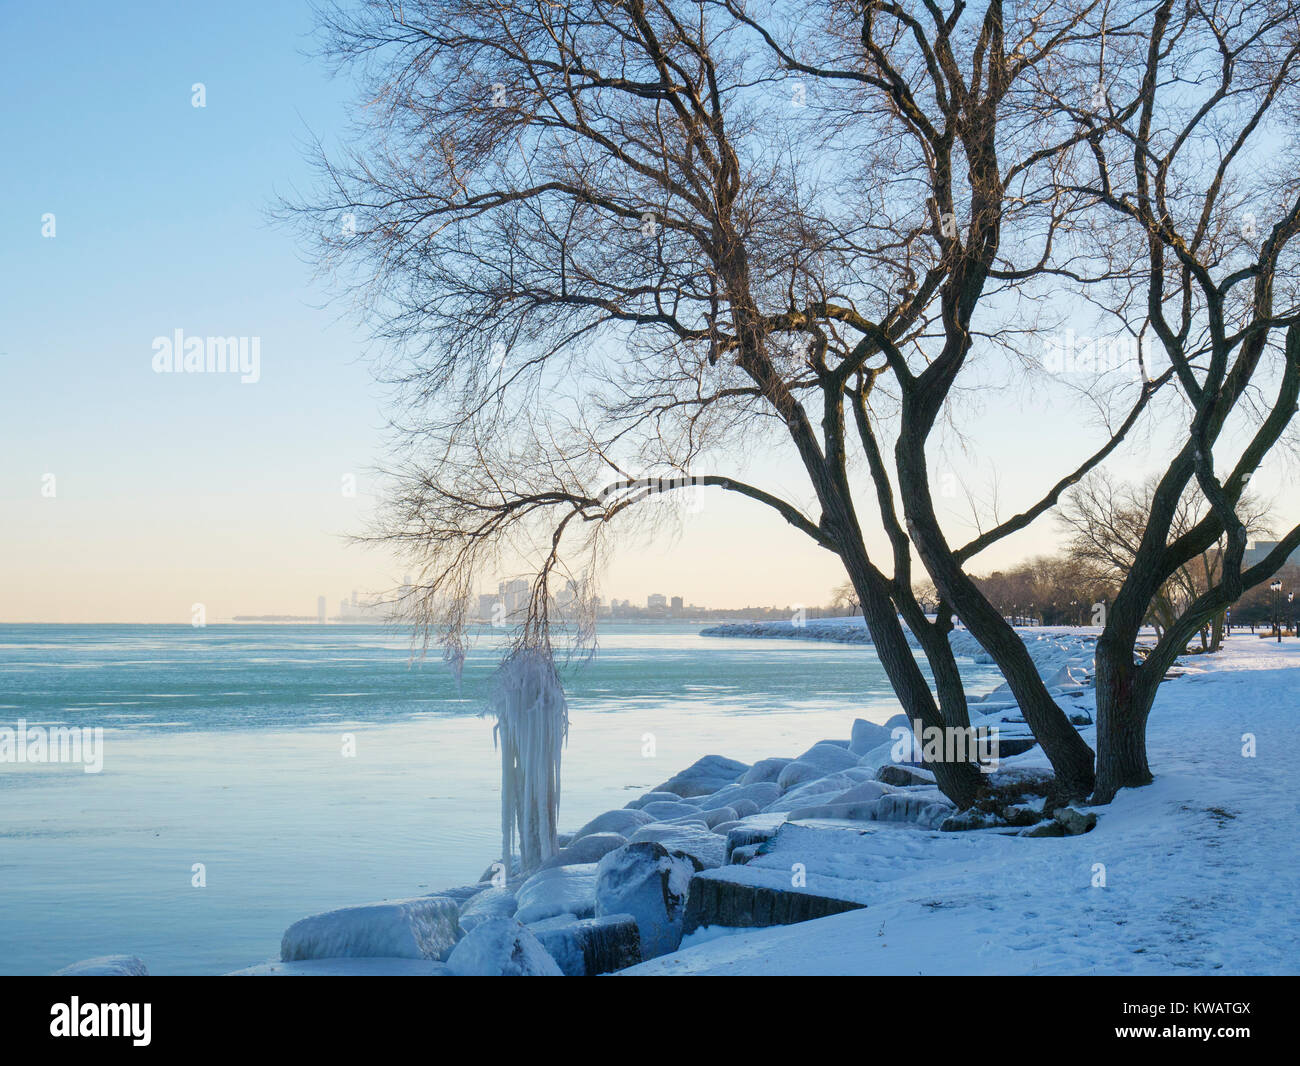 Evanston, Illinois, USA. 2nd January 2018.  A frigid Lake Michigan scene as temperatures climbed to 10ºF/-12ºC today in this northern lakefront suburb of Chicago. Downtown Chicago is on the horizon. Credit: Todd Bannor/Alamy Live News Stock Photo